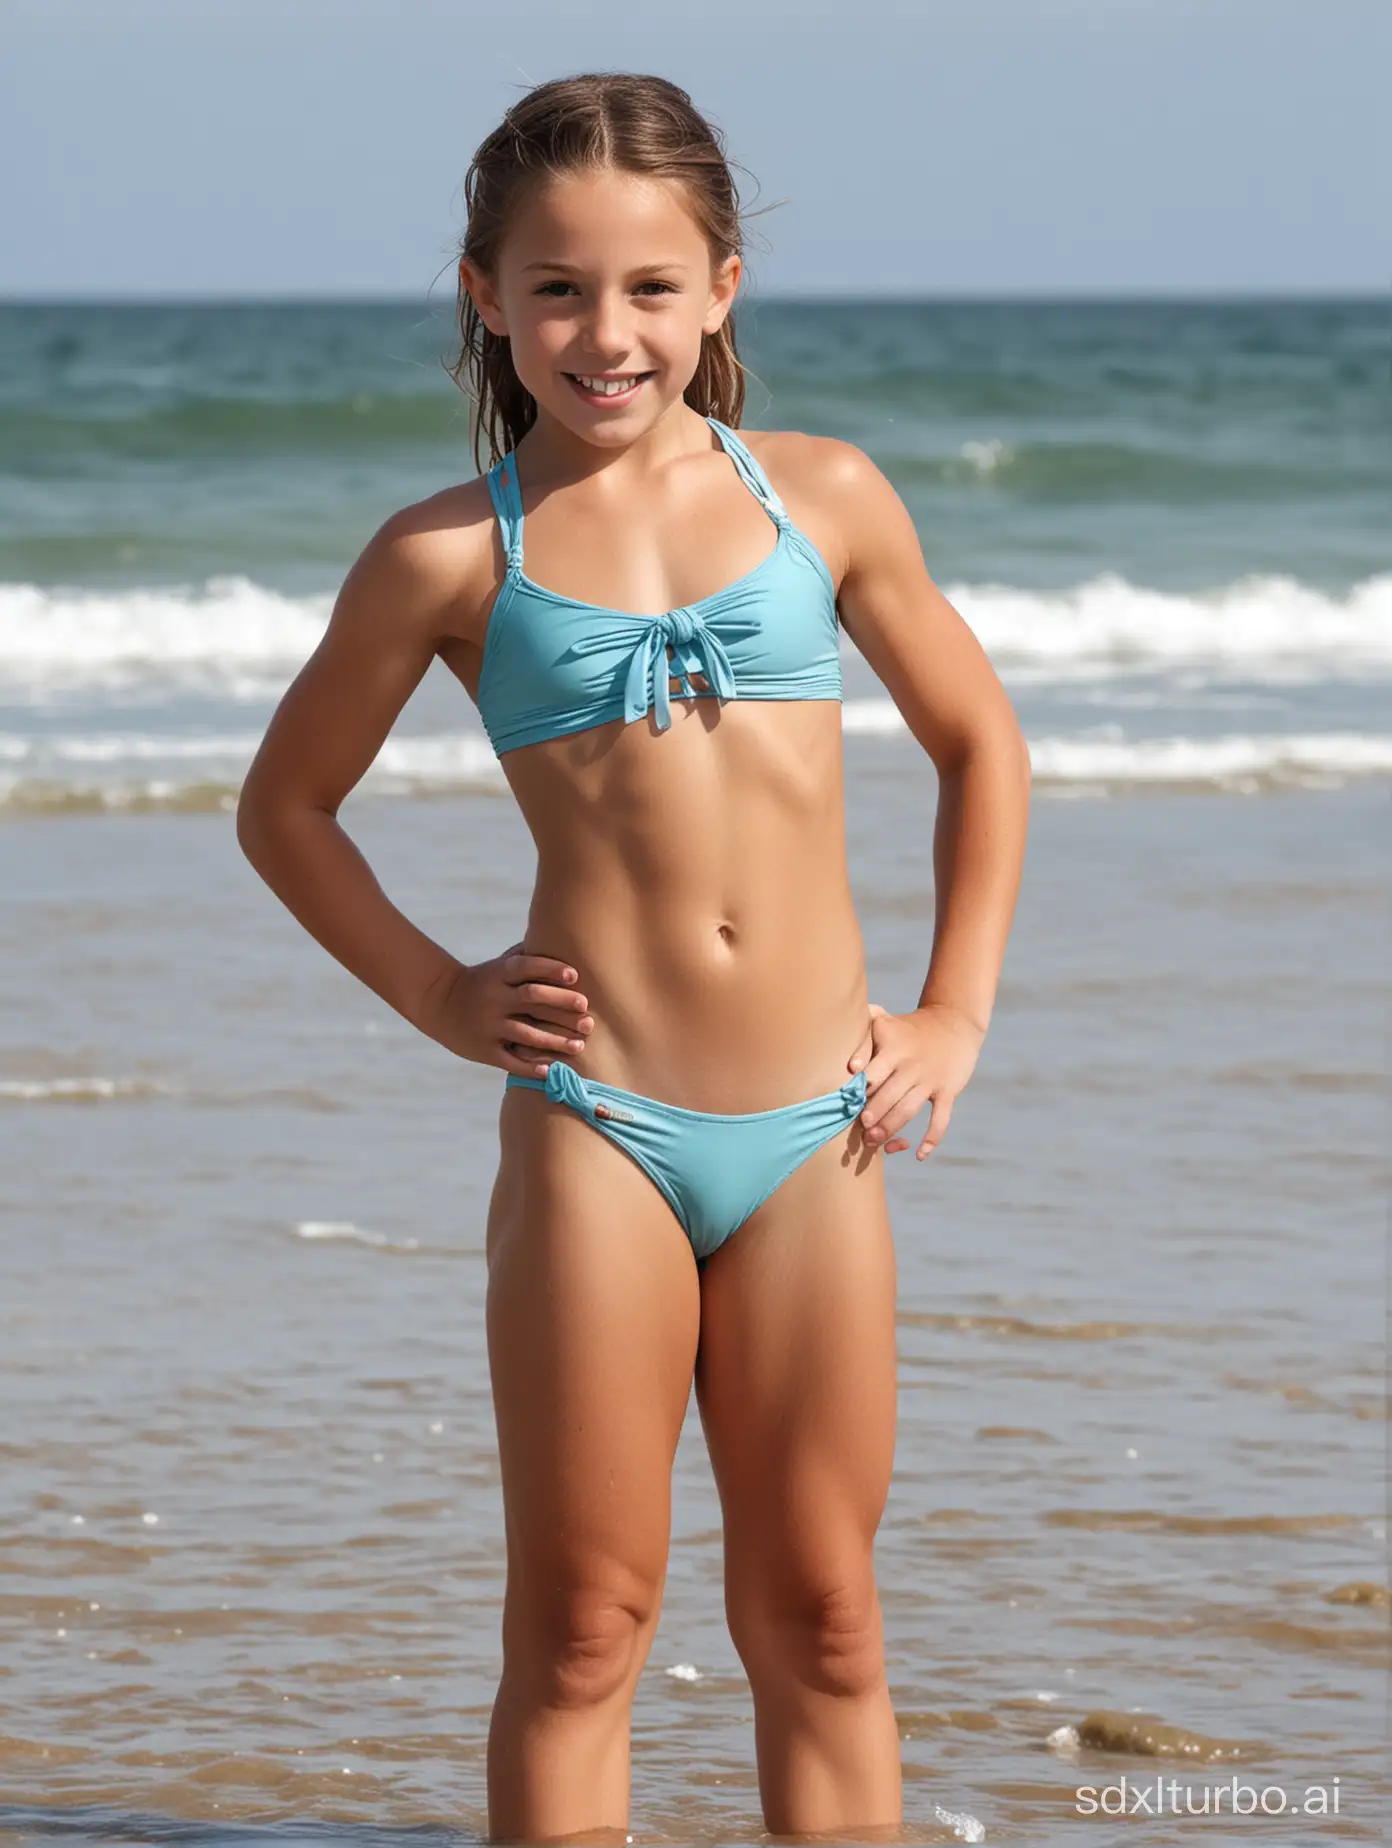 Caitlin Clark at 8 years old, flat chested, muscular abs, string swimsuit at the beach